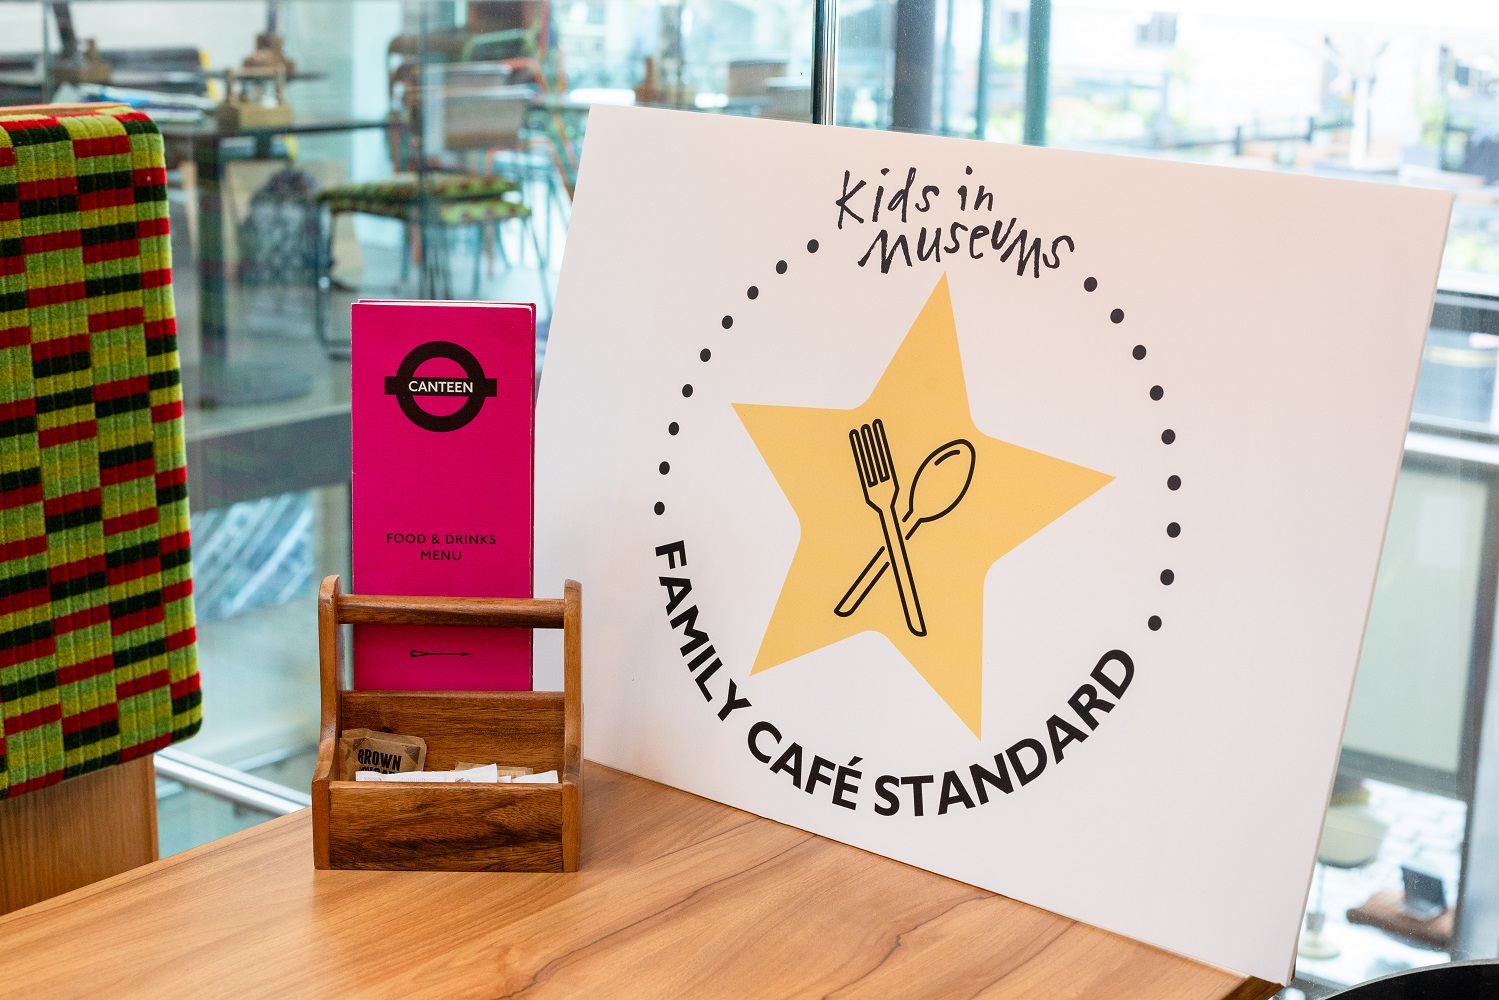 A large sign with the Kids in Museums Family Café Standard logo (a star with a crossed fork and spoon in the middle) stood on a table at Canteen, the London Transport Museum café, one of 20 accredited sites in the UK.